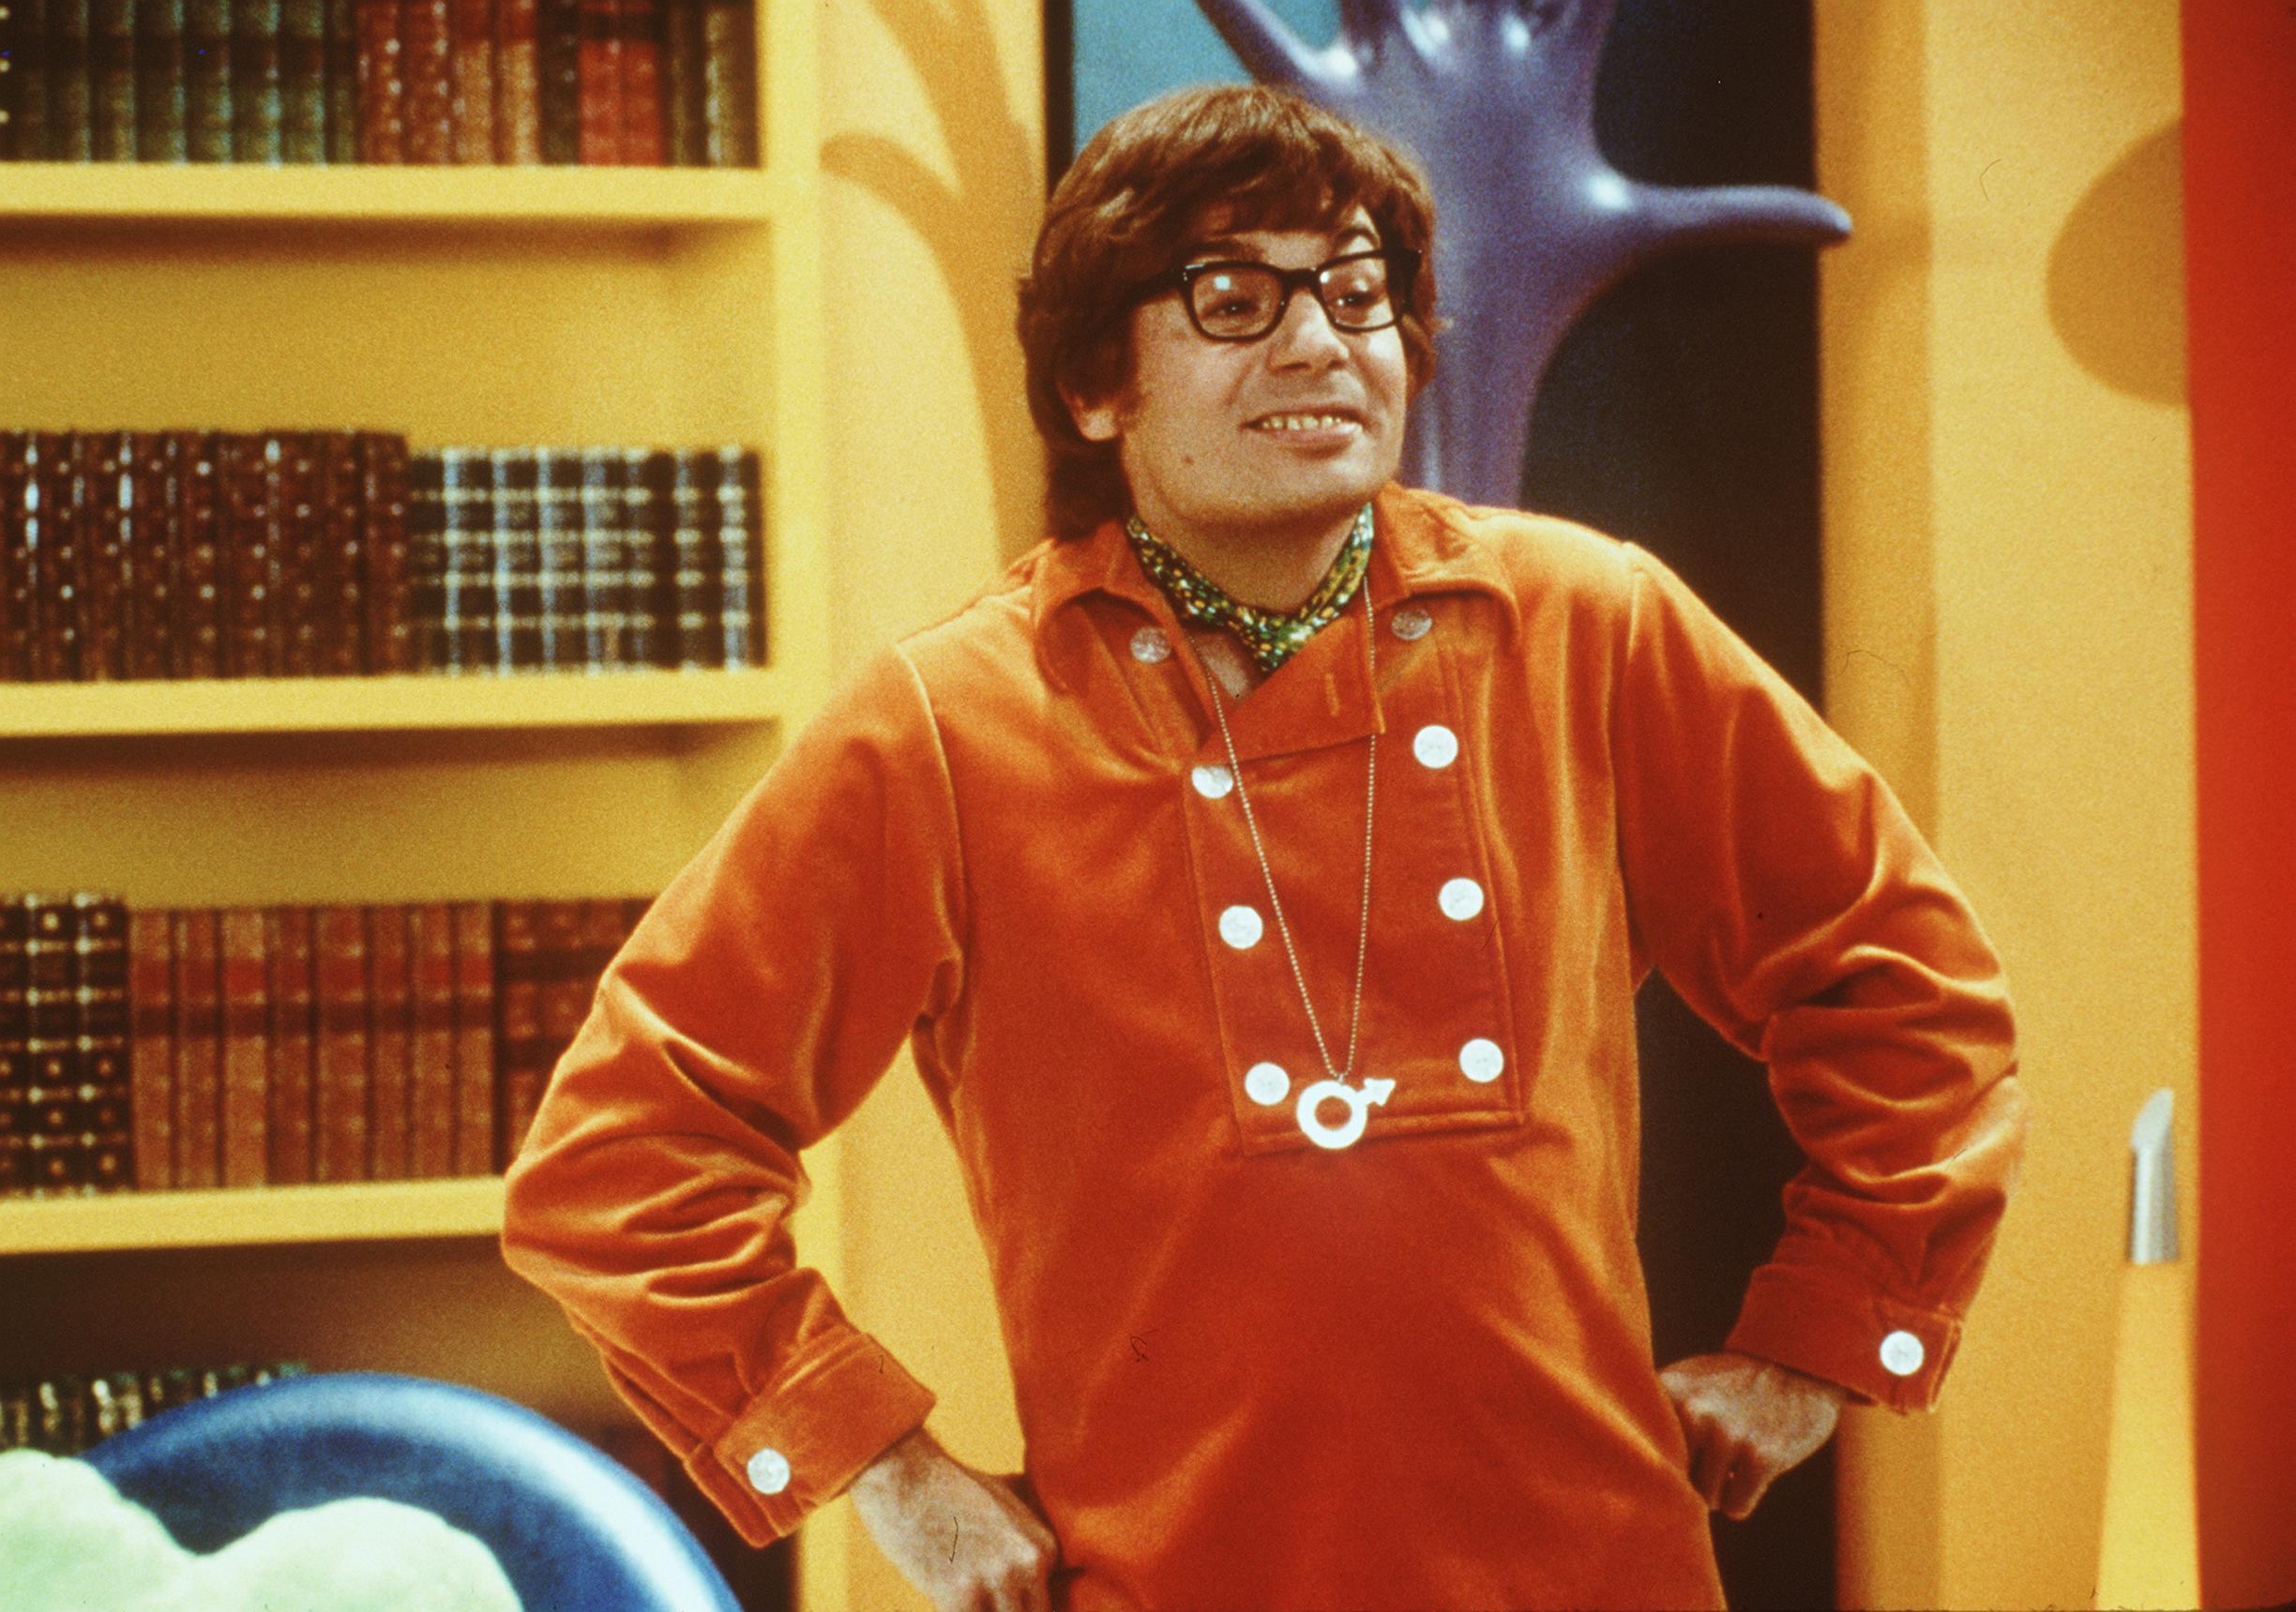 Mike Myers stars as Austin Powers in Austin Powers: The Spy Who Shagged Me